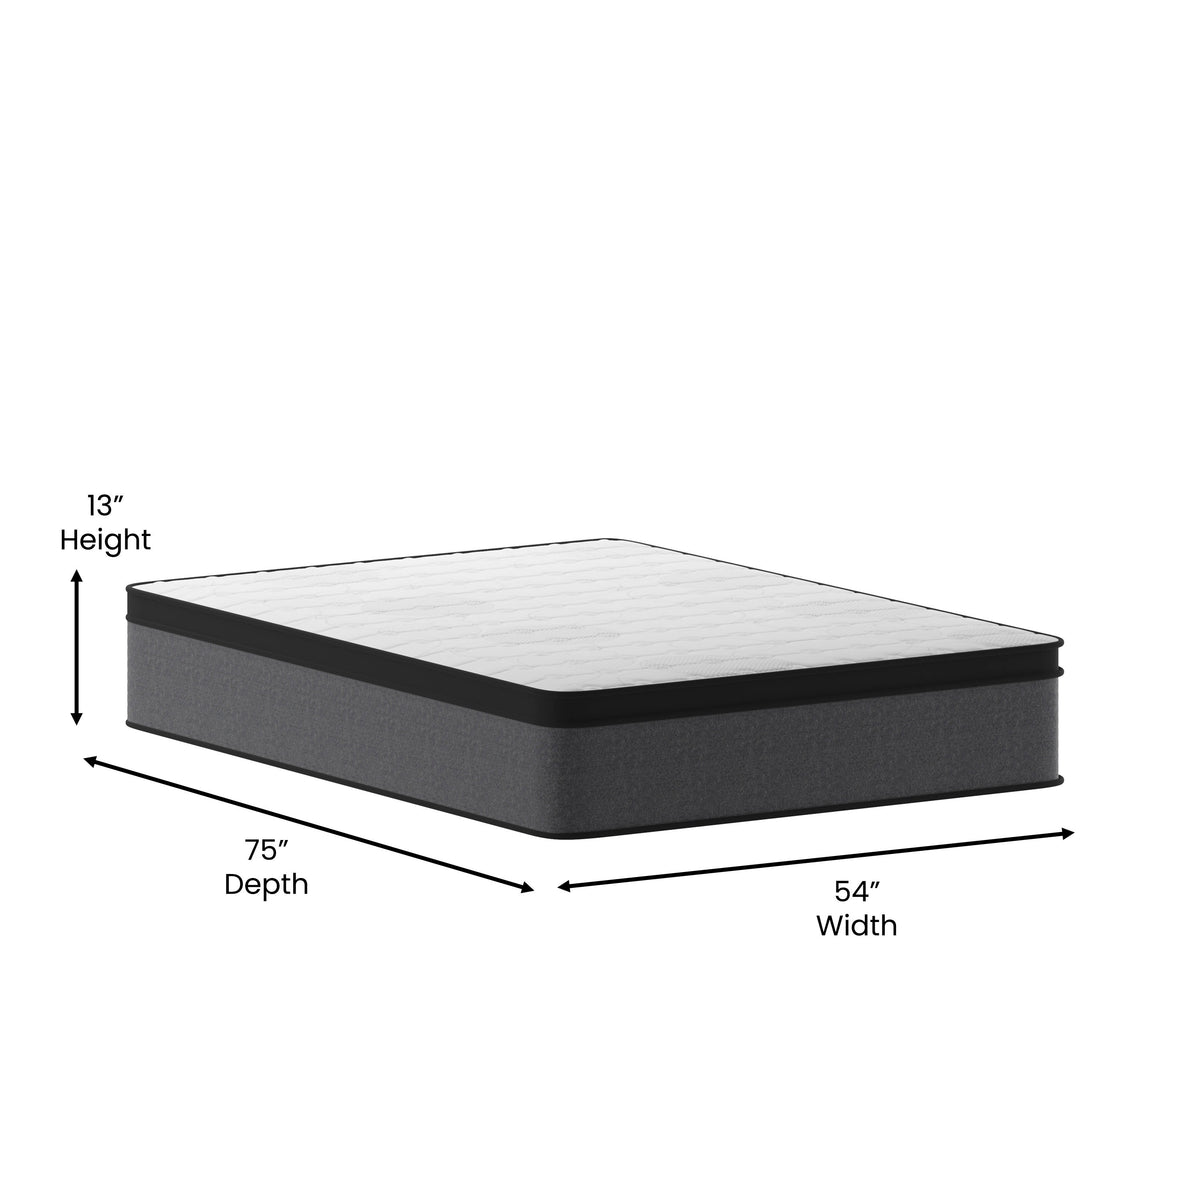 Full |#| 13 Inch Hybrid Pressure Relief Euro Pillow Top Full Size Mattress In A Box